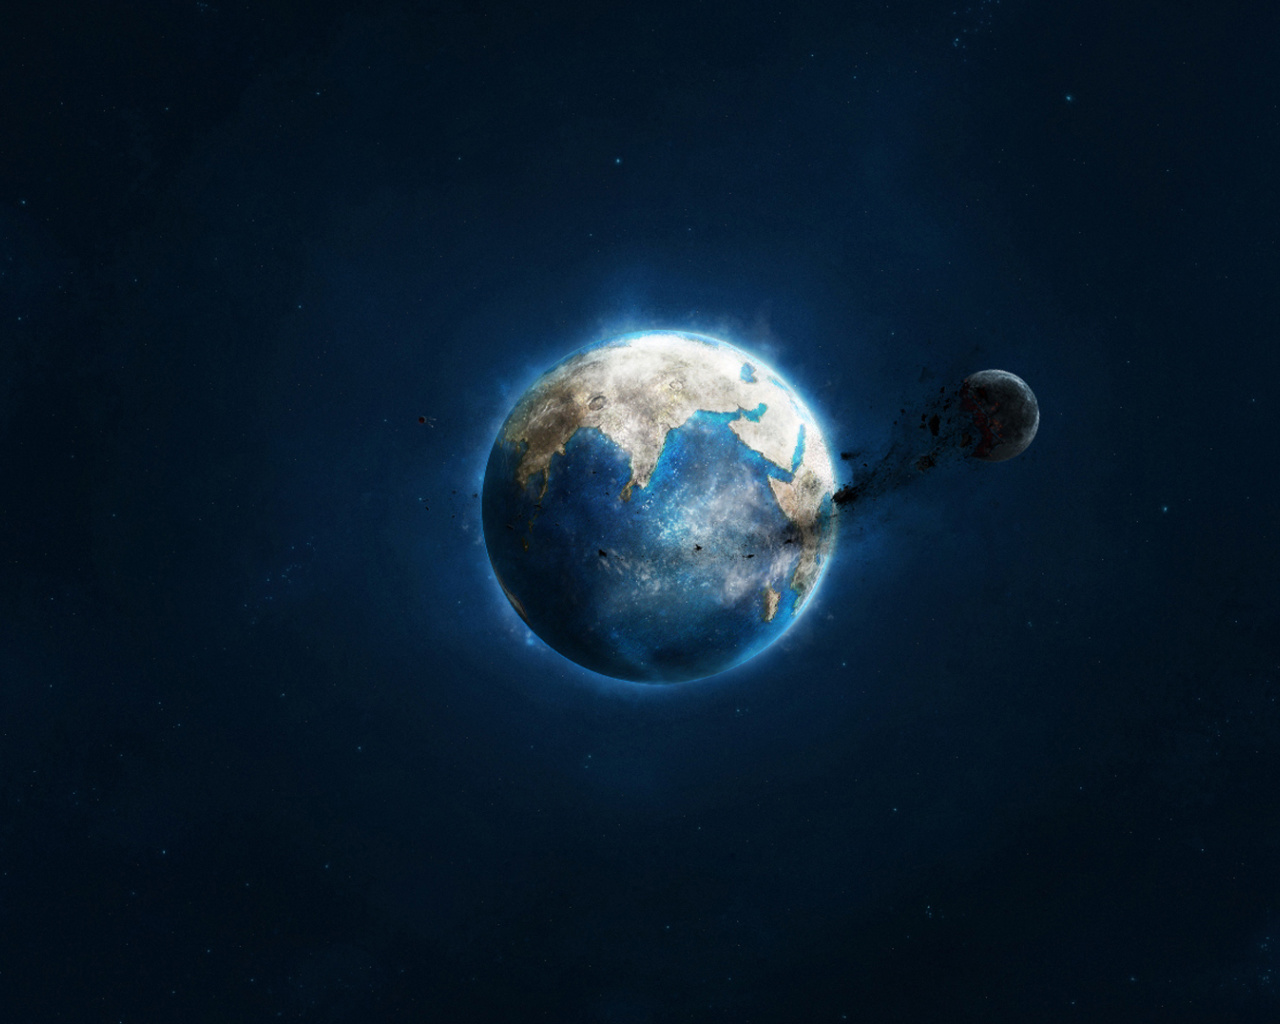 Planet and Asteroid wallpaper 1280x1024